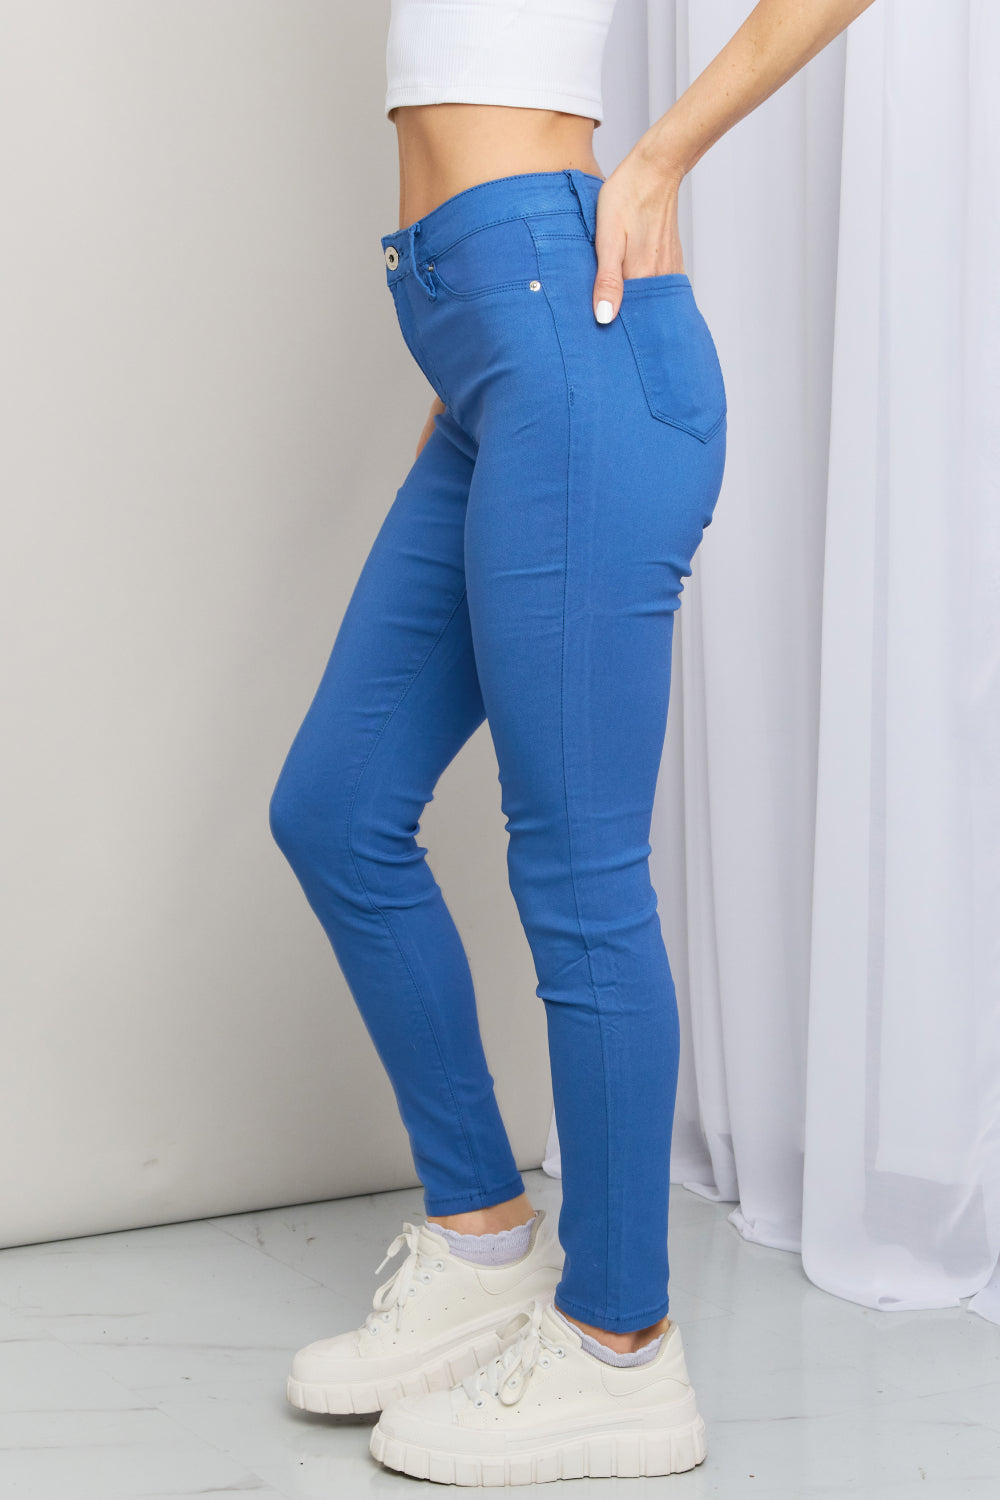 Kate Hyper-Stretch Mid-Rise Skinny Jeans in Electric Blue - Bit of Swank